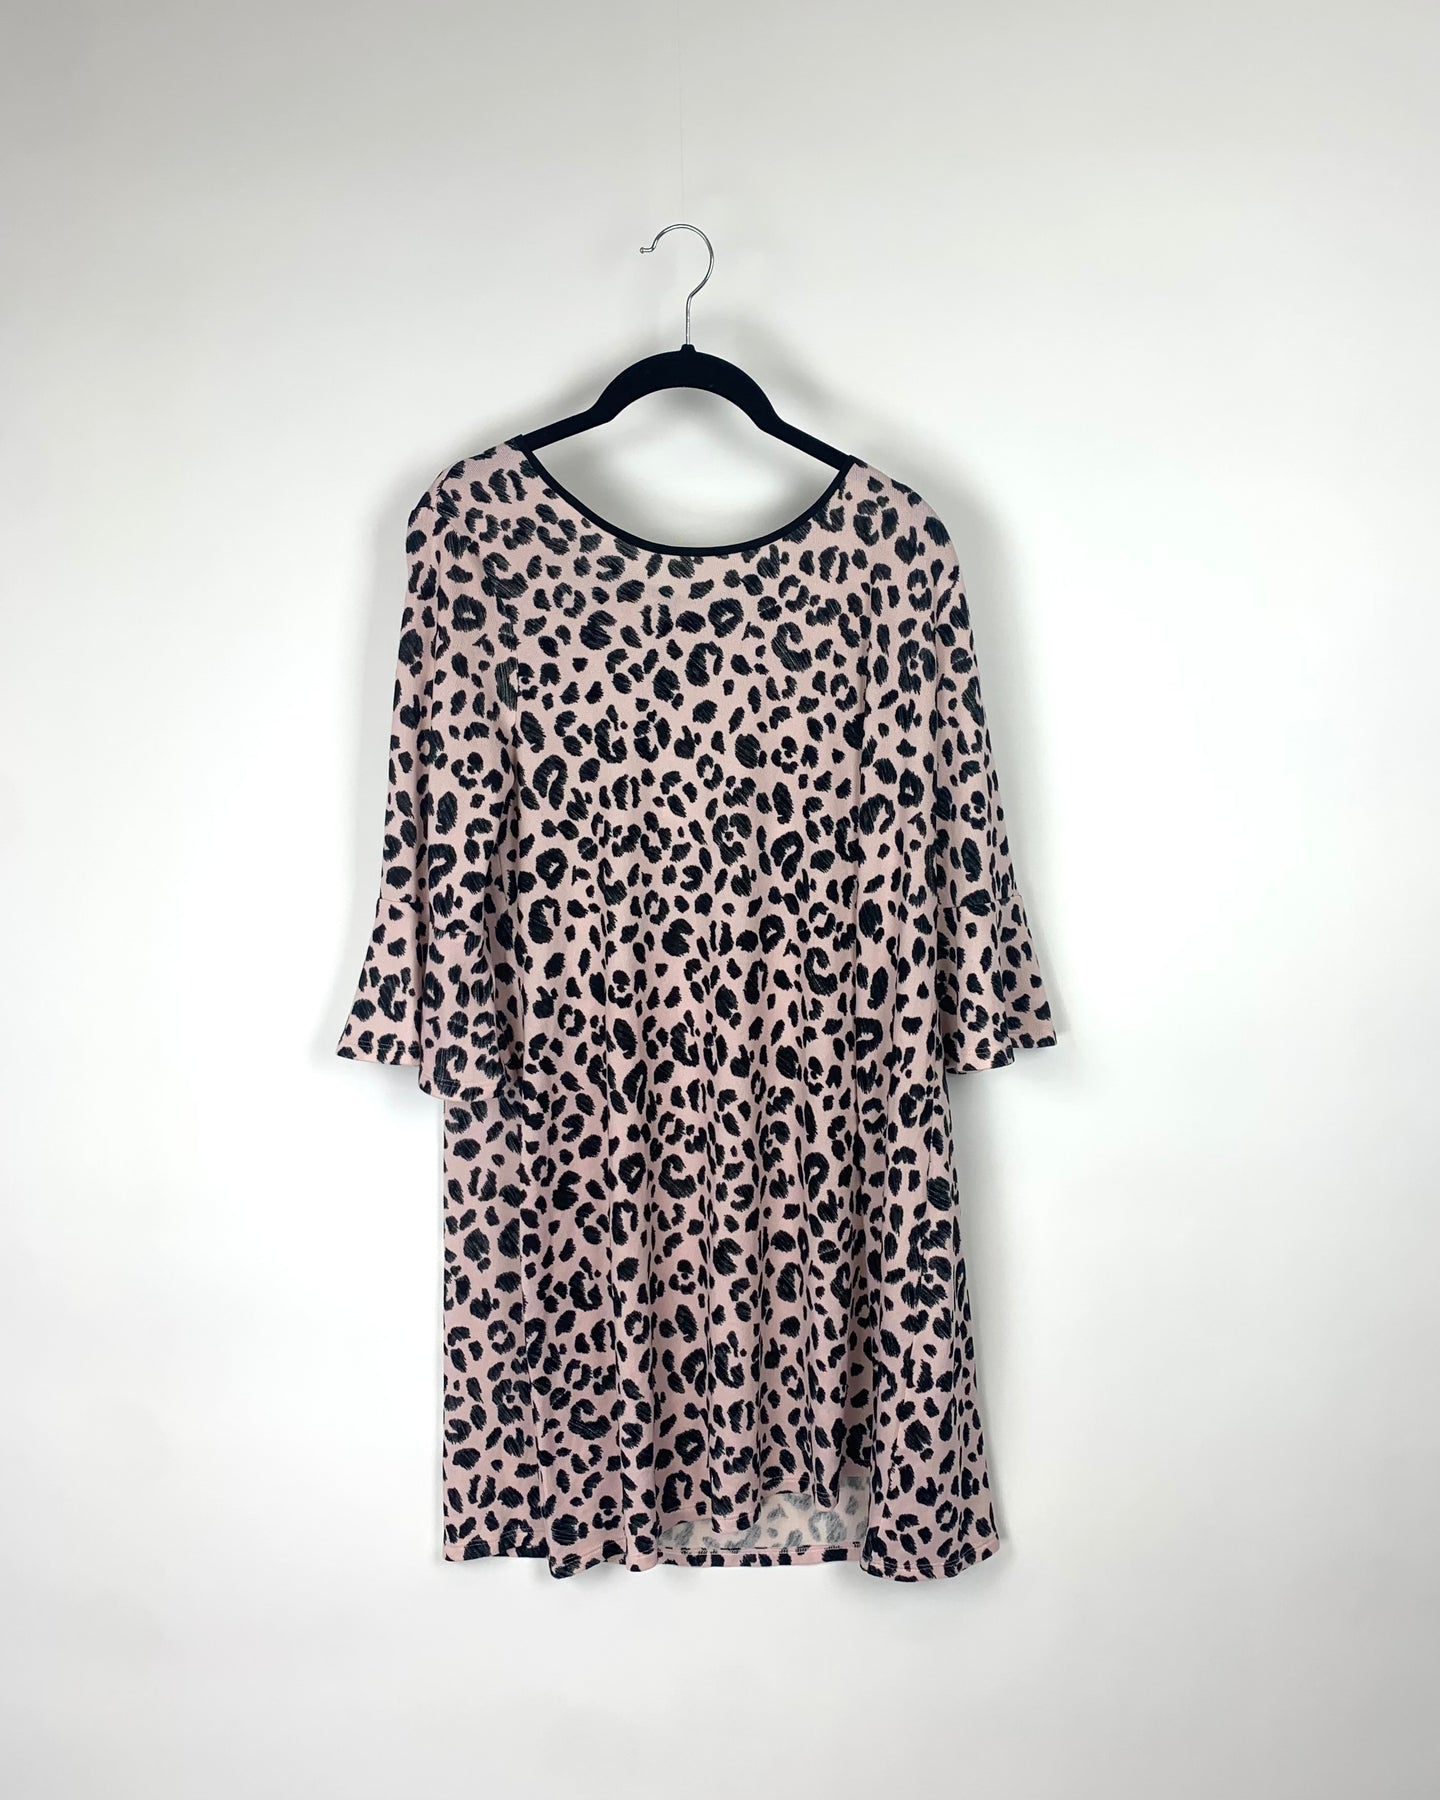 Kate Spade Pink and Black Cheetah Nightgown - Small – The Fashion Foundation